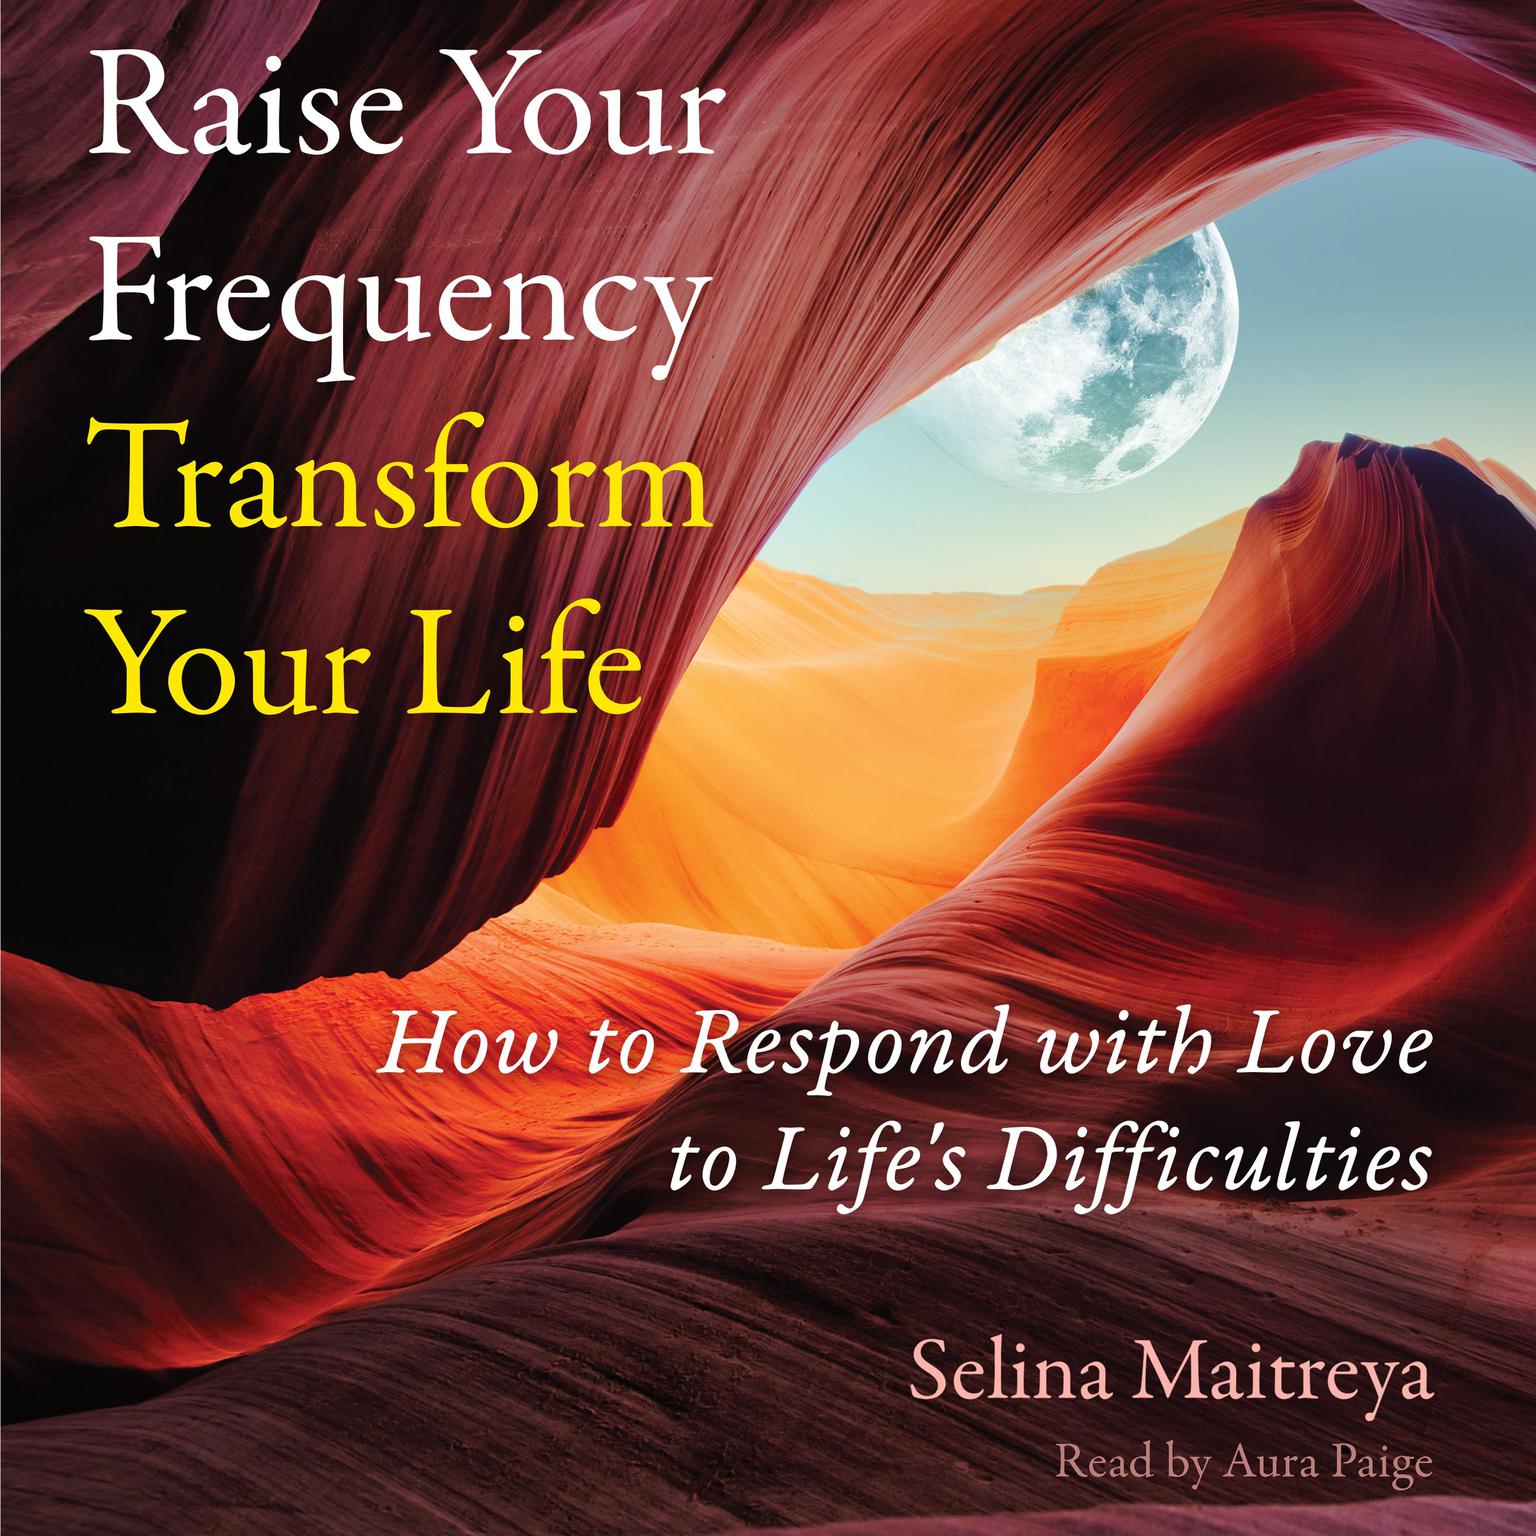 Raise Your Frequency, Transform Your Life: How to Respond with Love to Lifes Difficulties Audiobook, by Selina Maitreya